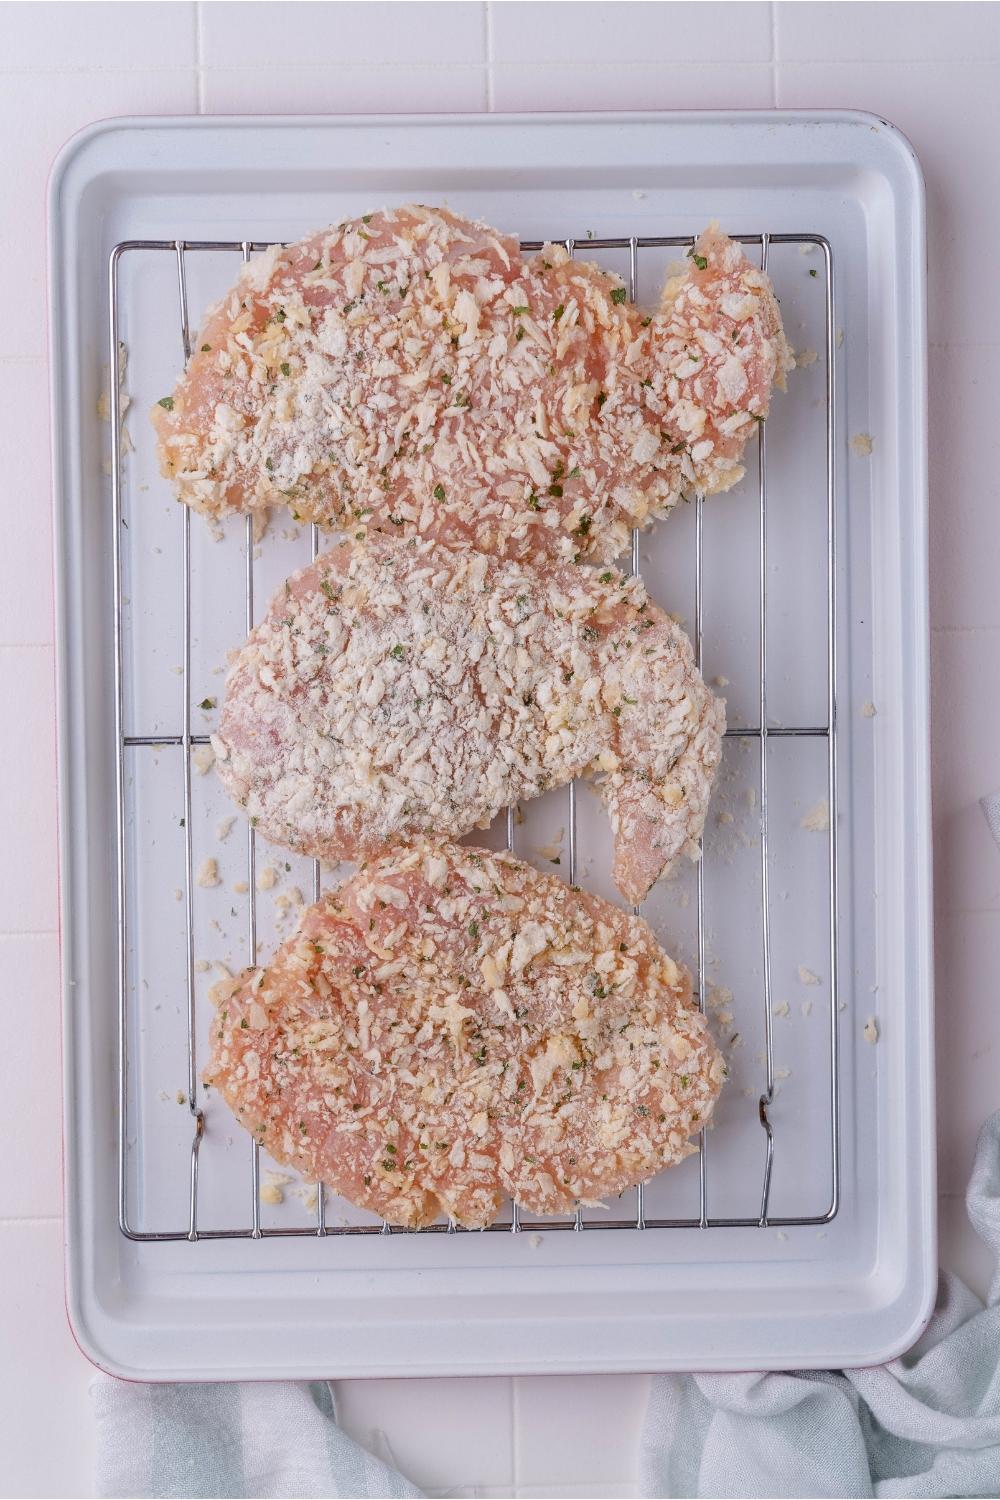 Raw flattened chicken breasts coated in a bread crumb mixture laid out on a rack that's on a baking sheet.